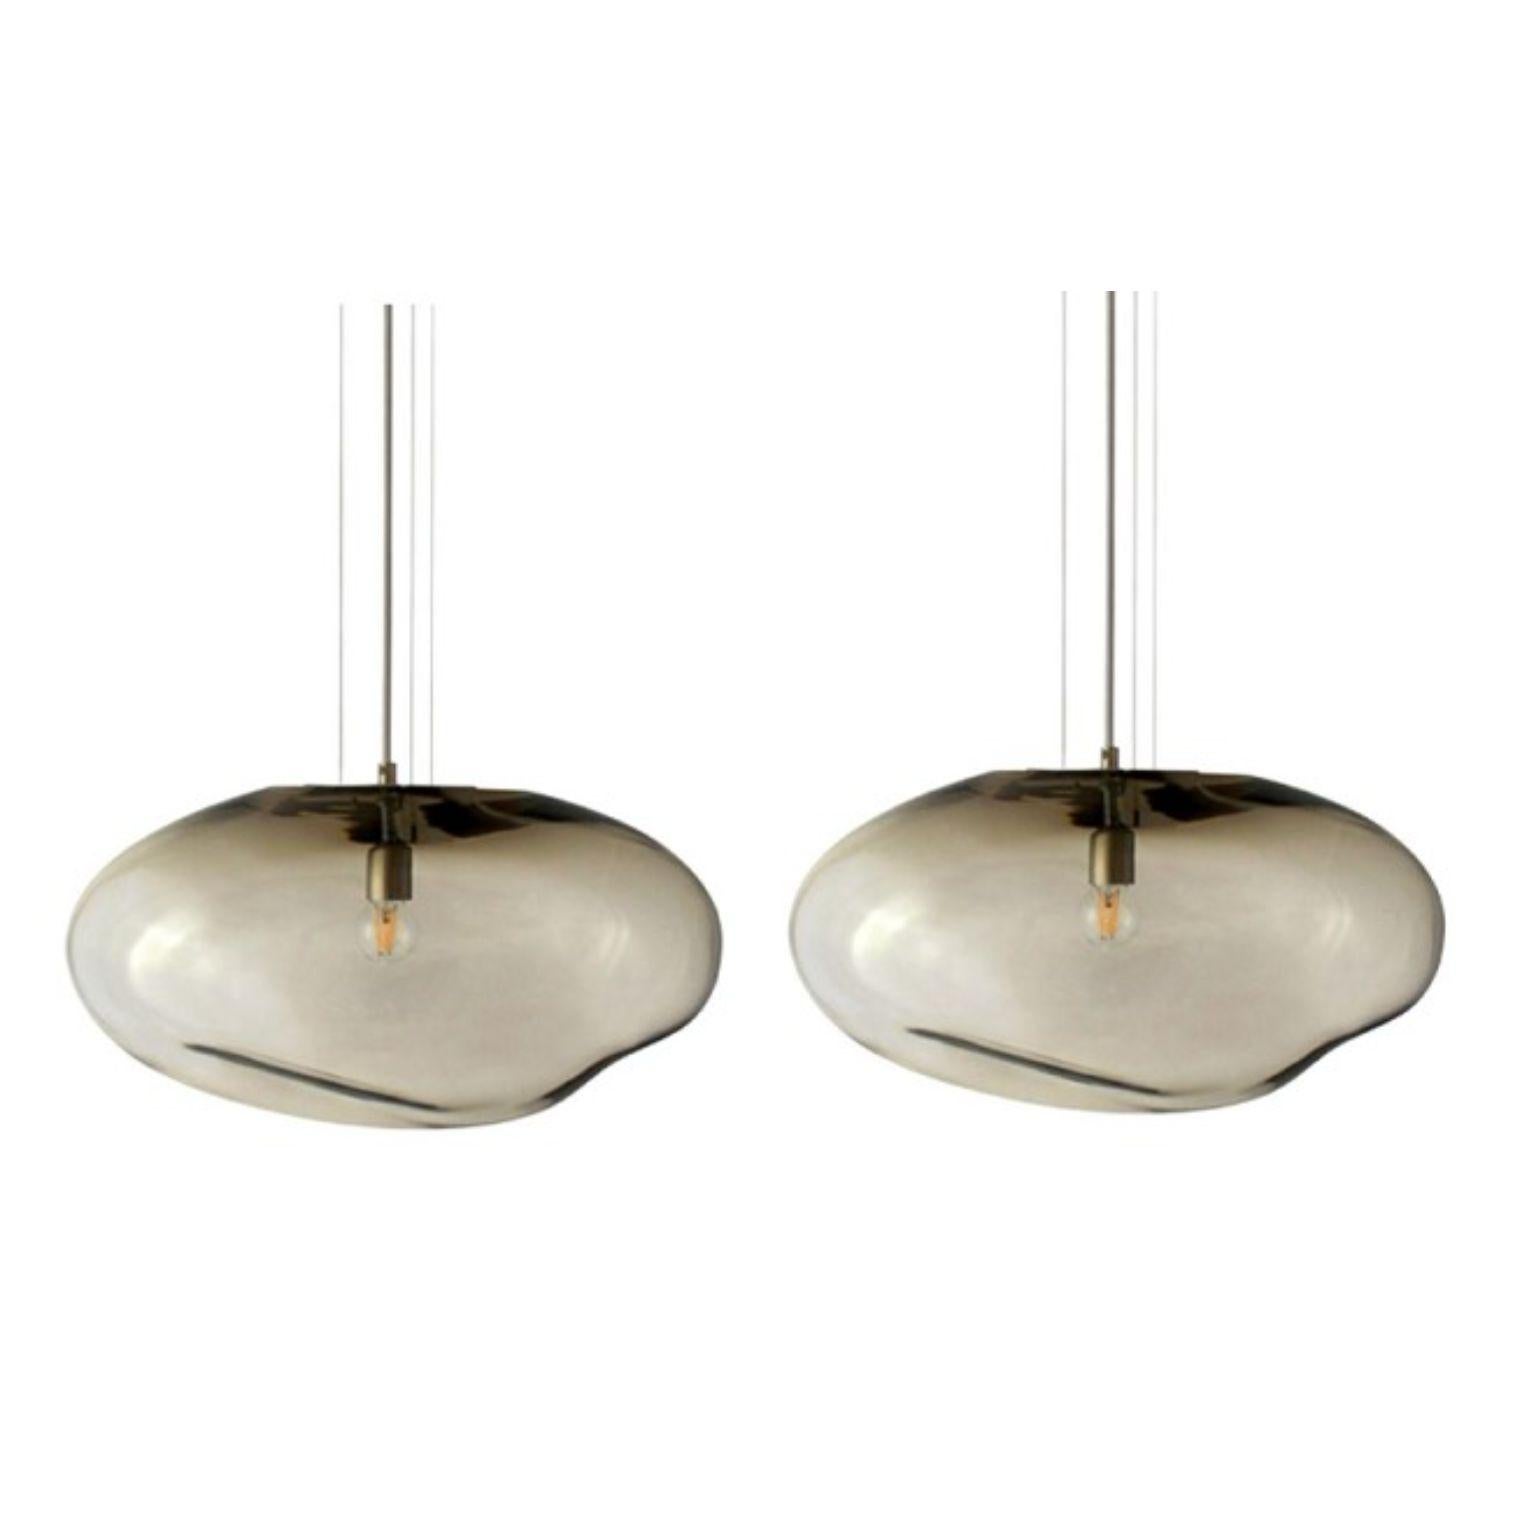 Set of 2 Haumea Amorph silver smoke L pendants by Eloa.
No UL listed 
Material: glass, steel, silver, LED Bulb
Dimensions: D27 x W39 x H30 cm
Also Available in different colours and dimensions.

All our lamps can be wired according to each country.